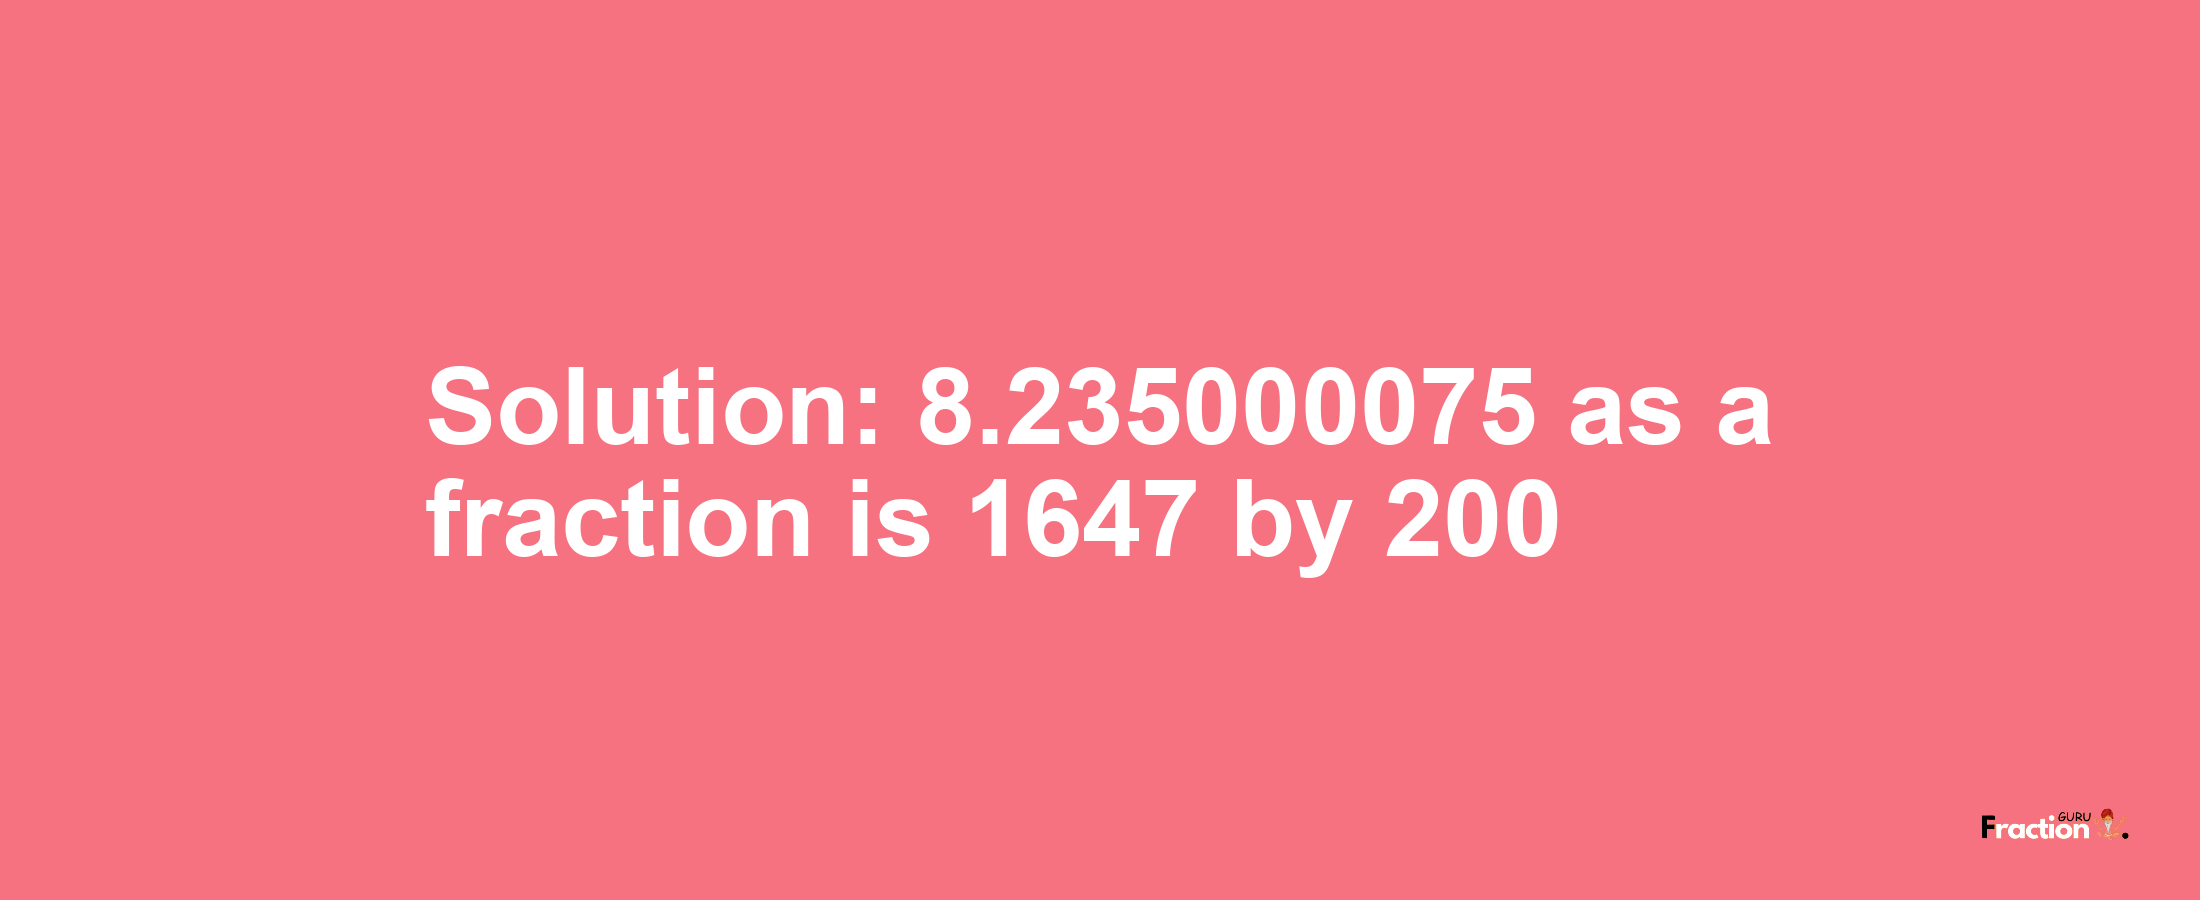 Solution:8.235000075 as a fraction is 1647/200